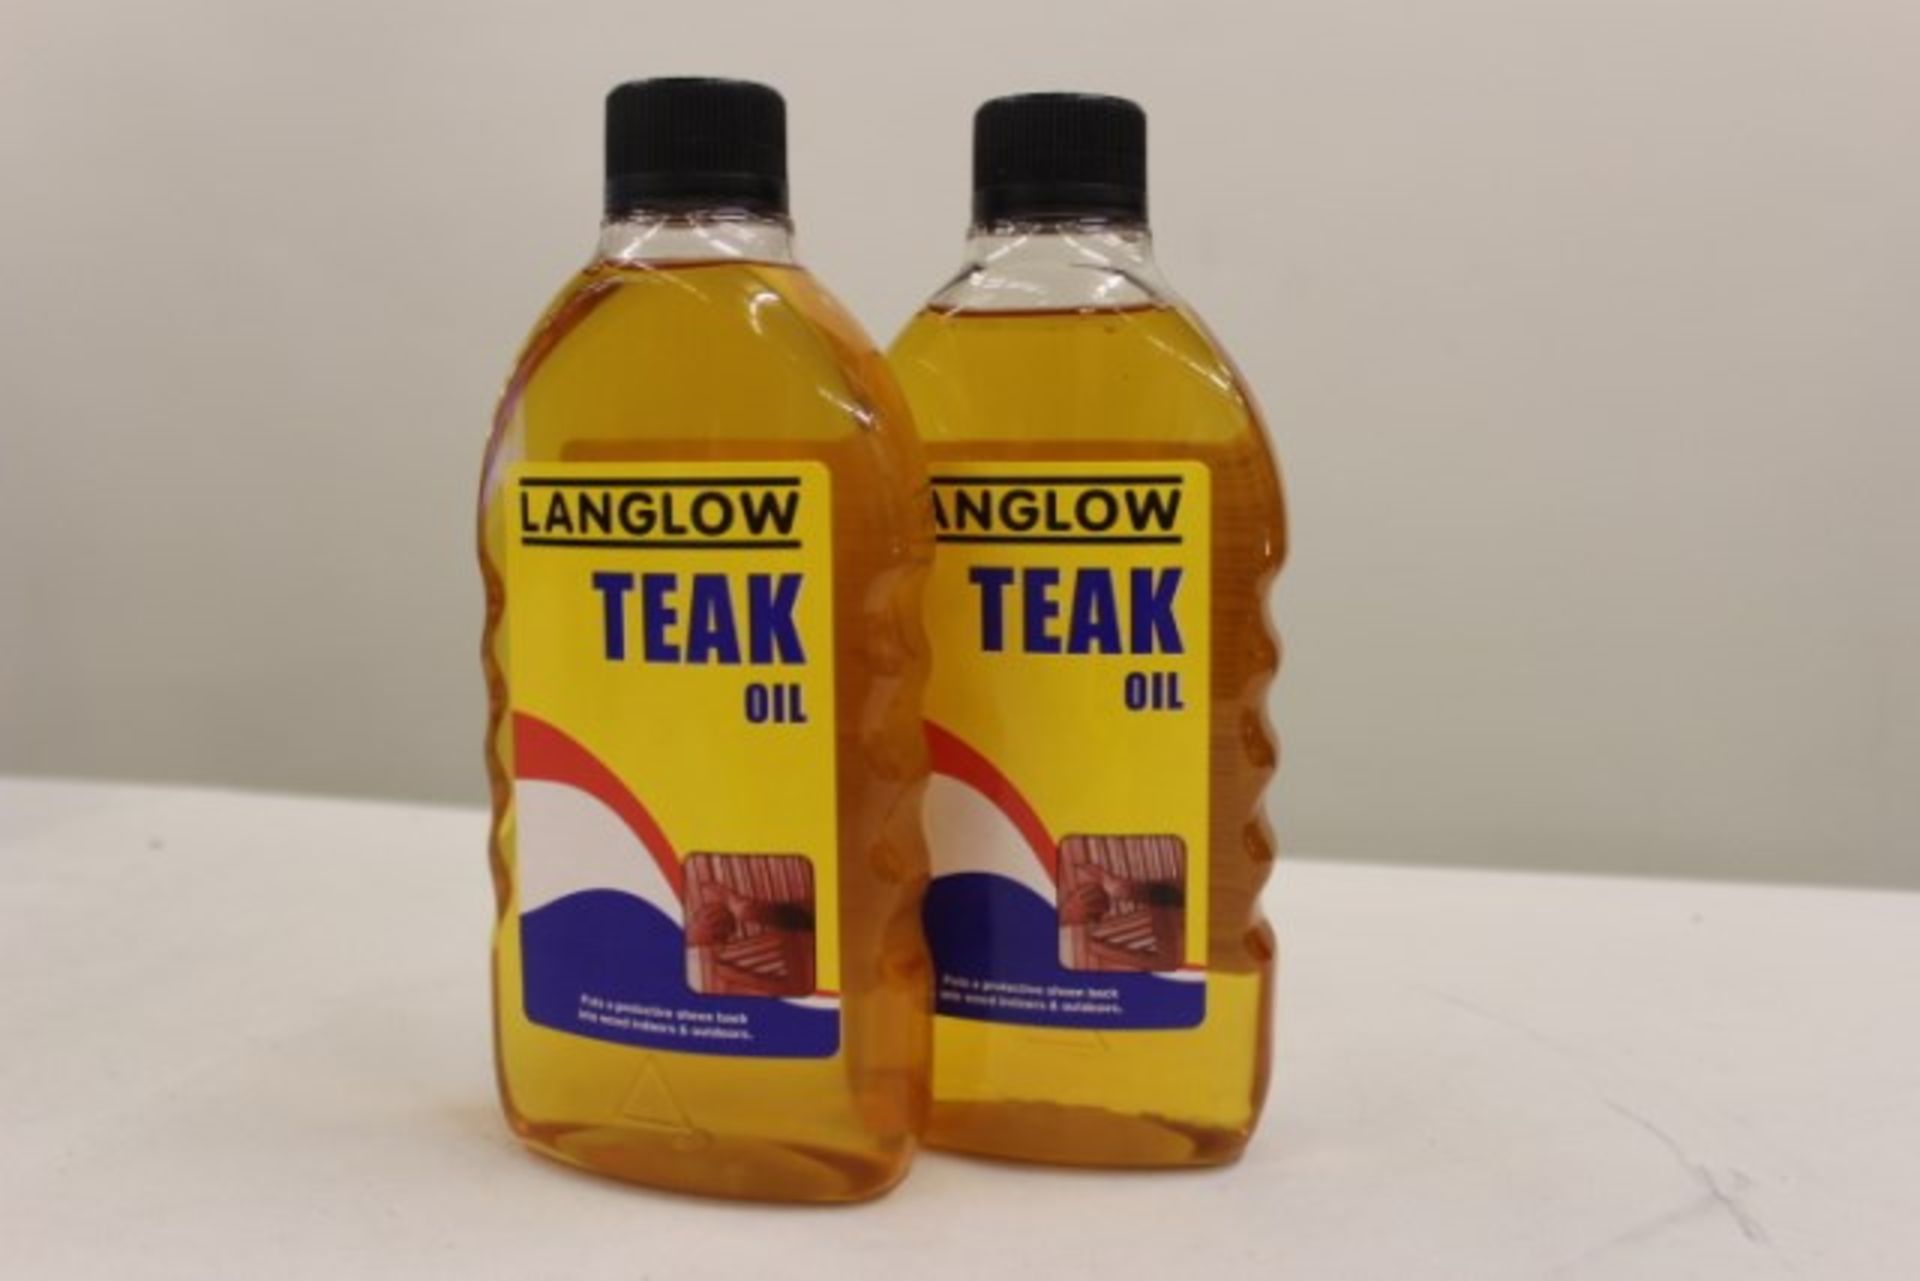 V *TRADE QTY* Grade A Two Bottles 500ml Teak oil X 3 YOUR BID PRICE TO BE MULTIPLIED BY THREE